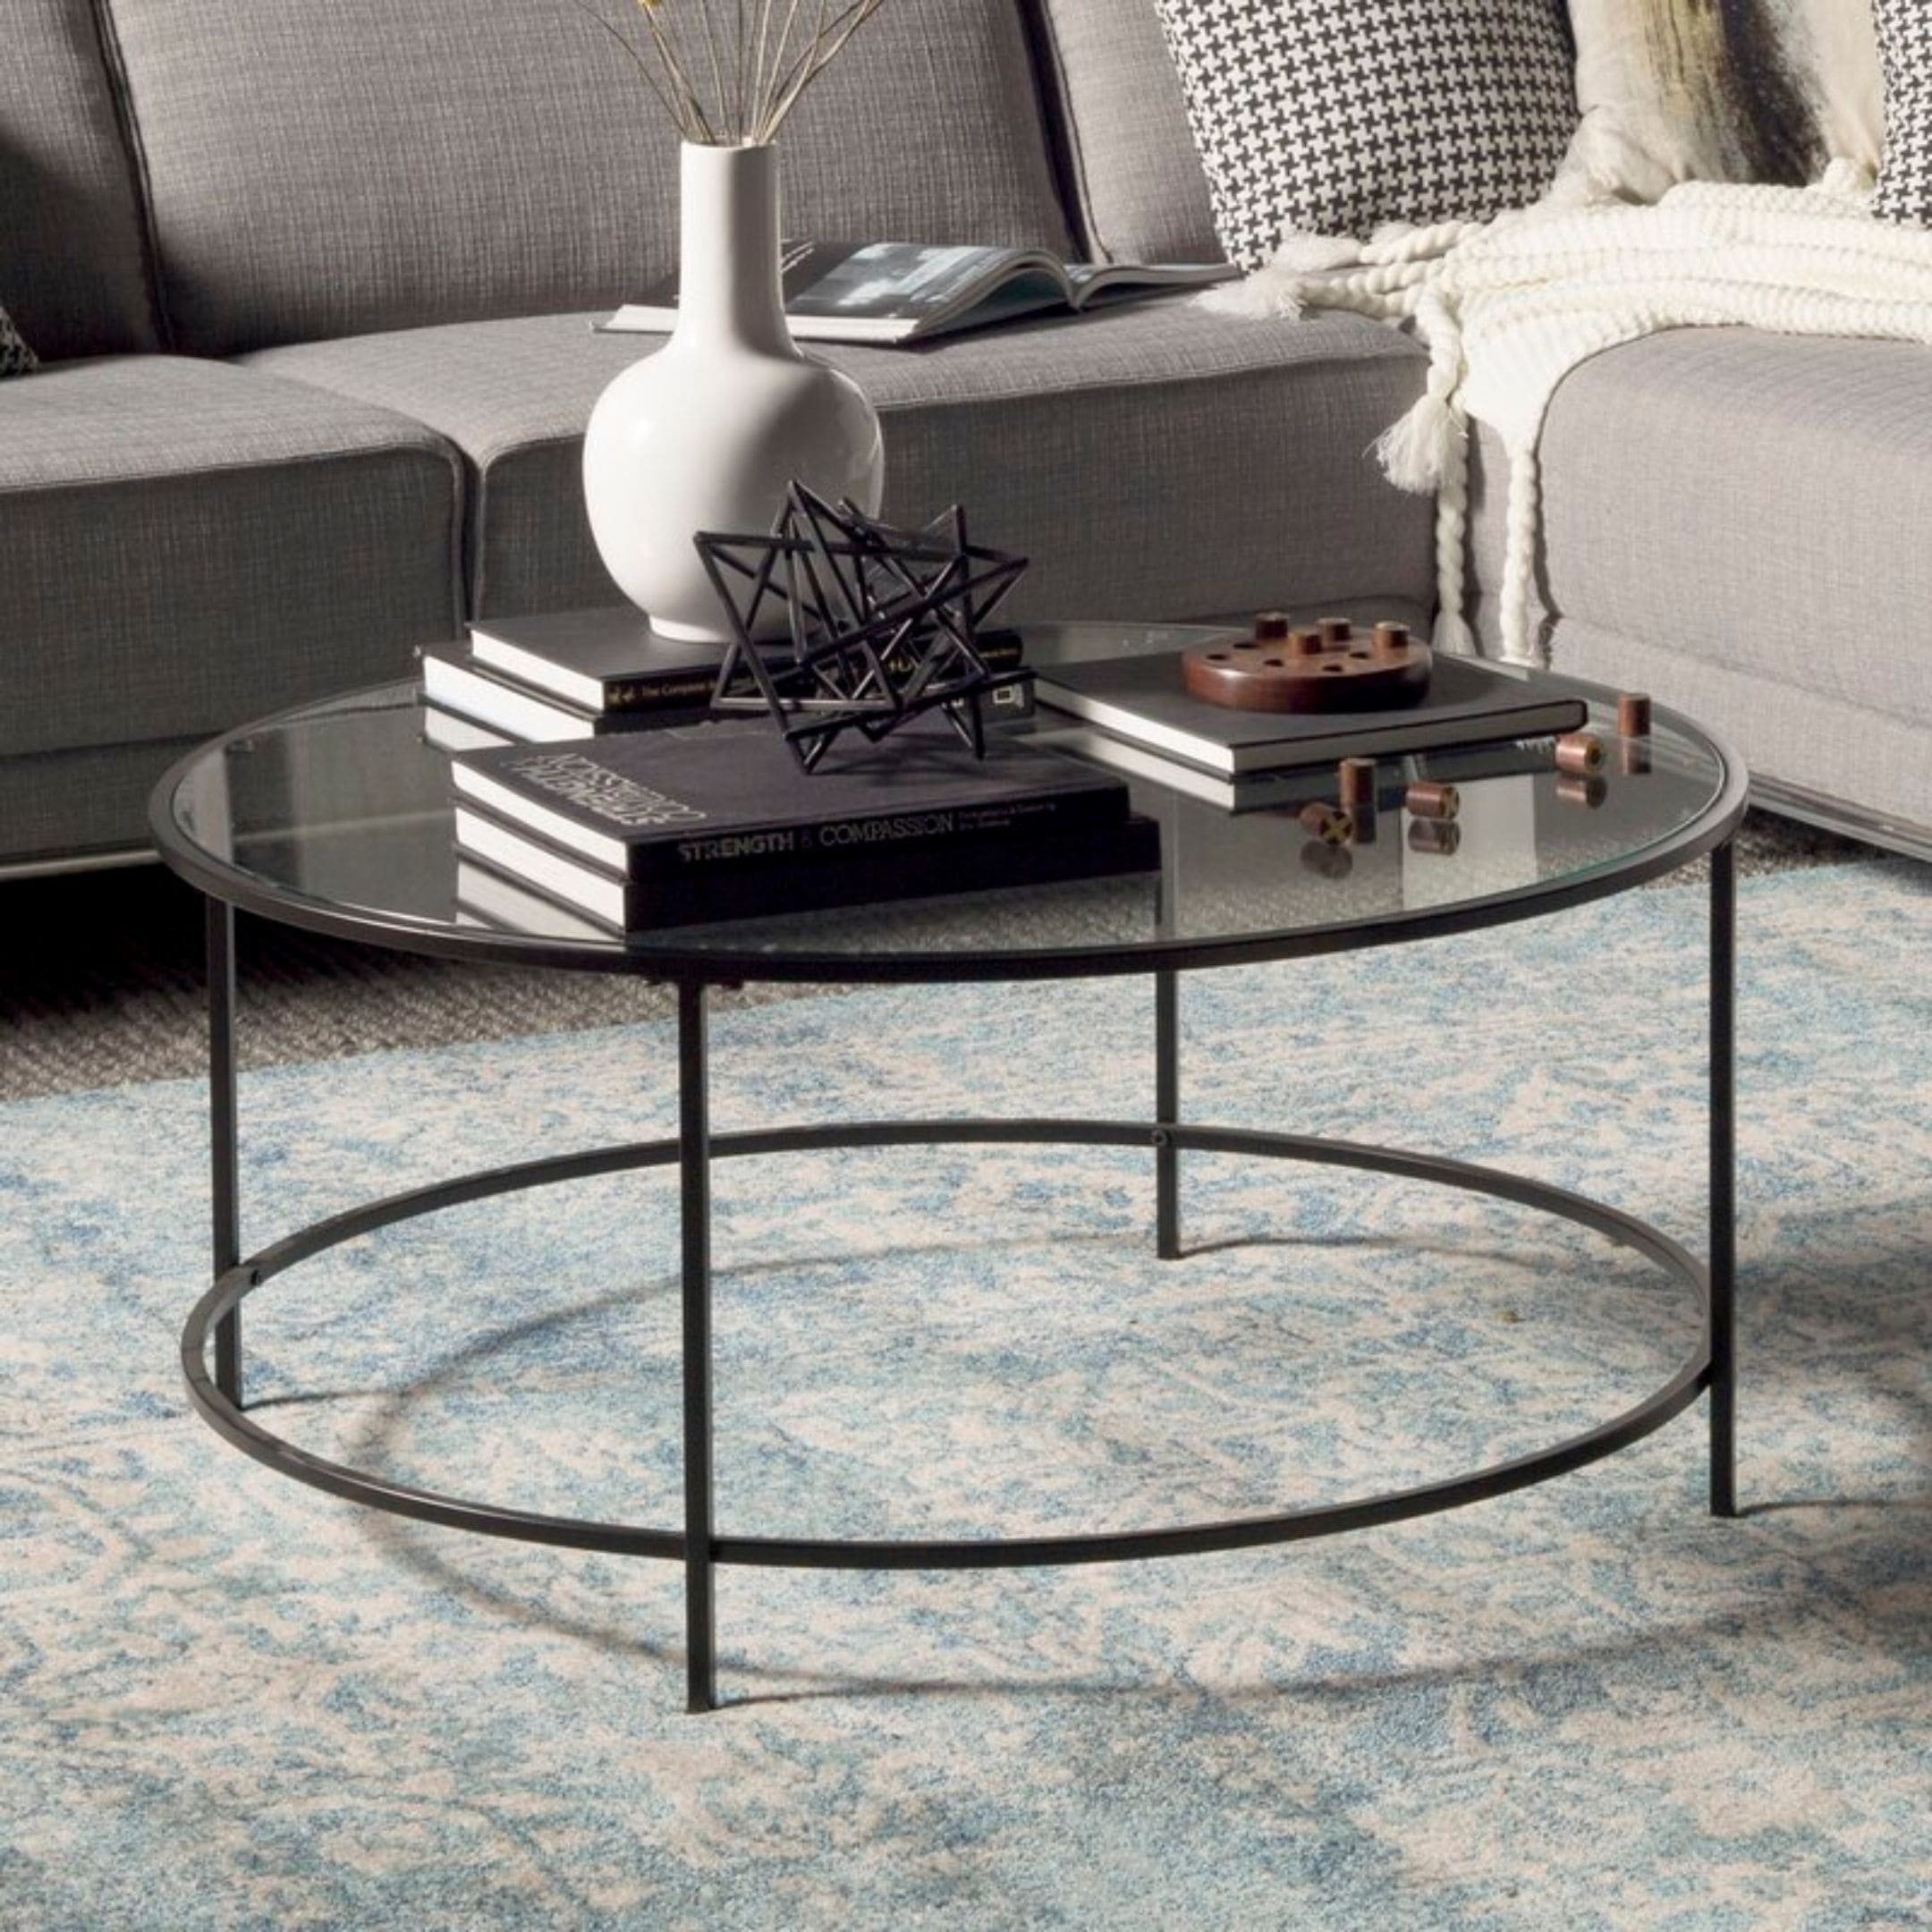 Black round coffee table with glass topper.